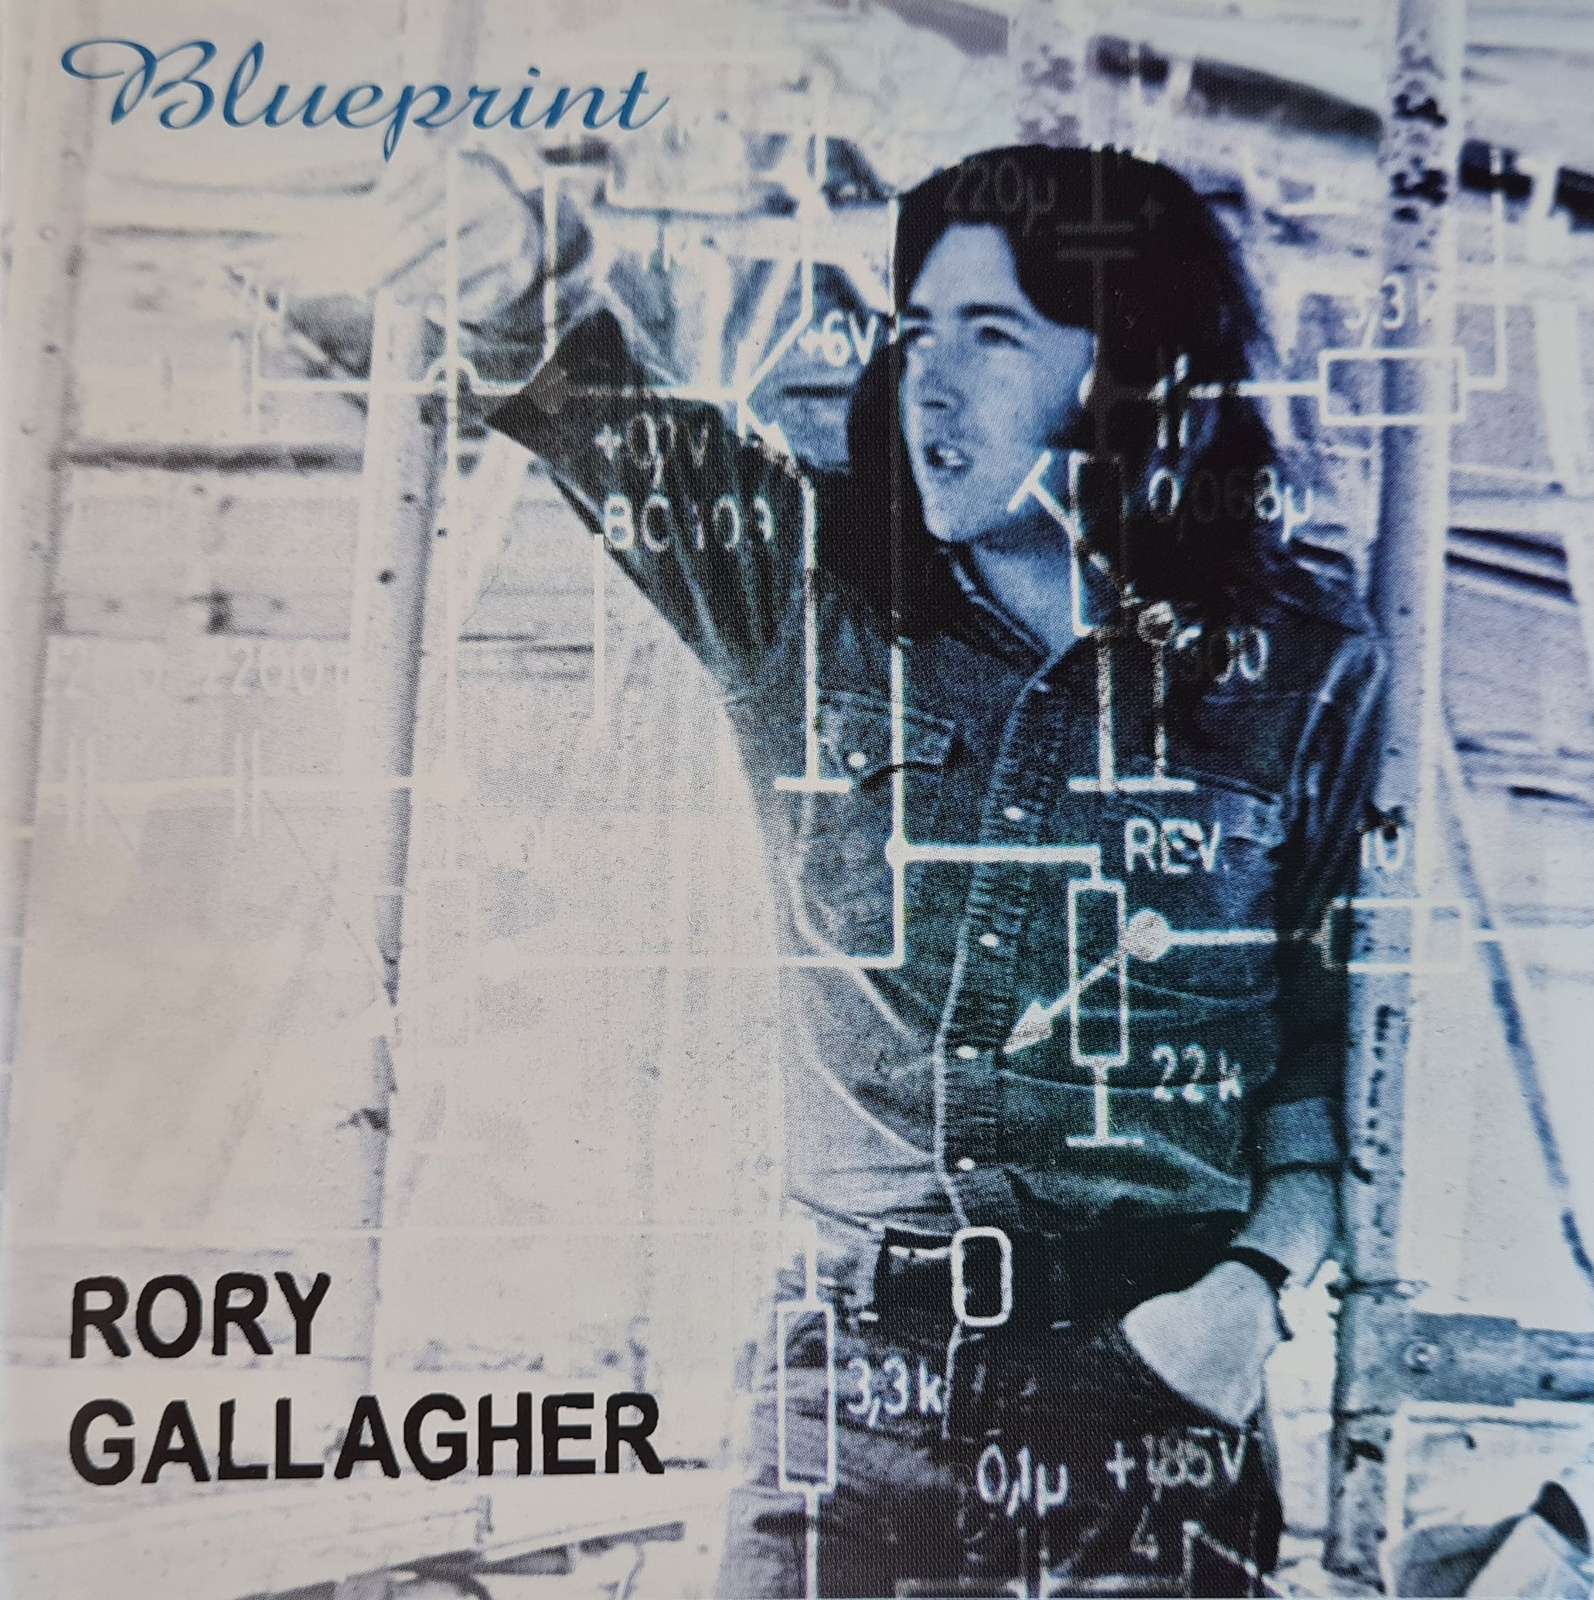 Rory Gallagher -  Blueprint (CD)